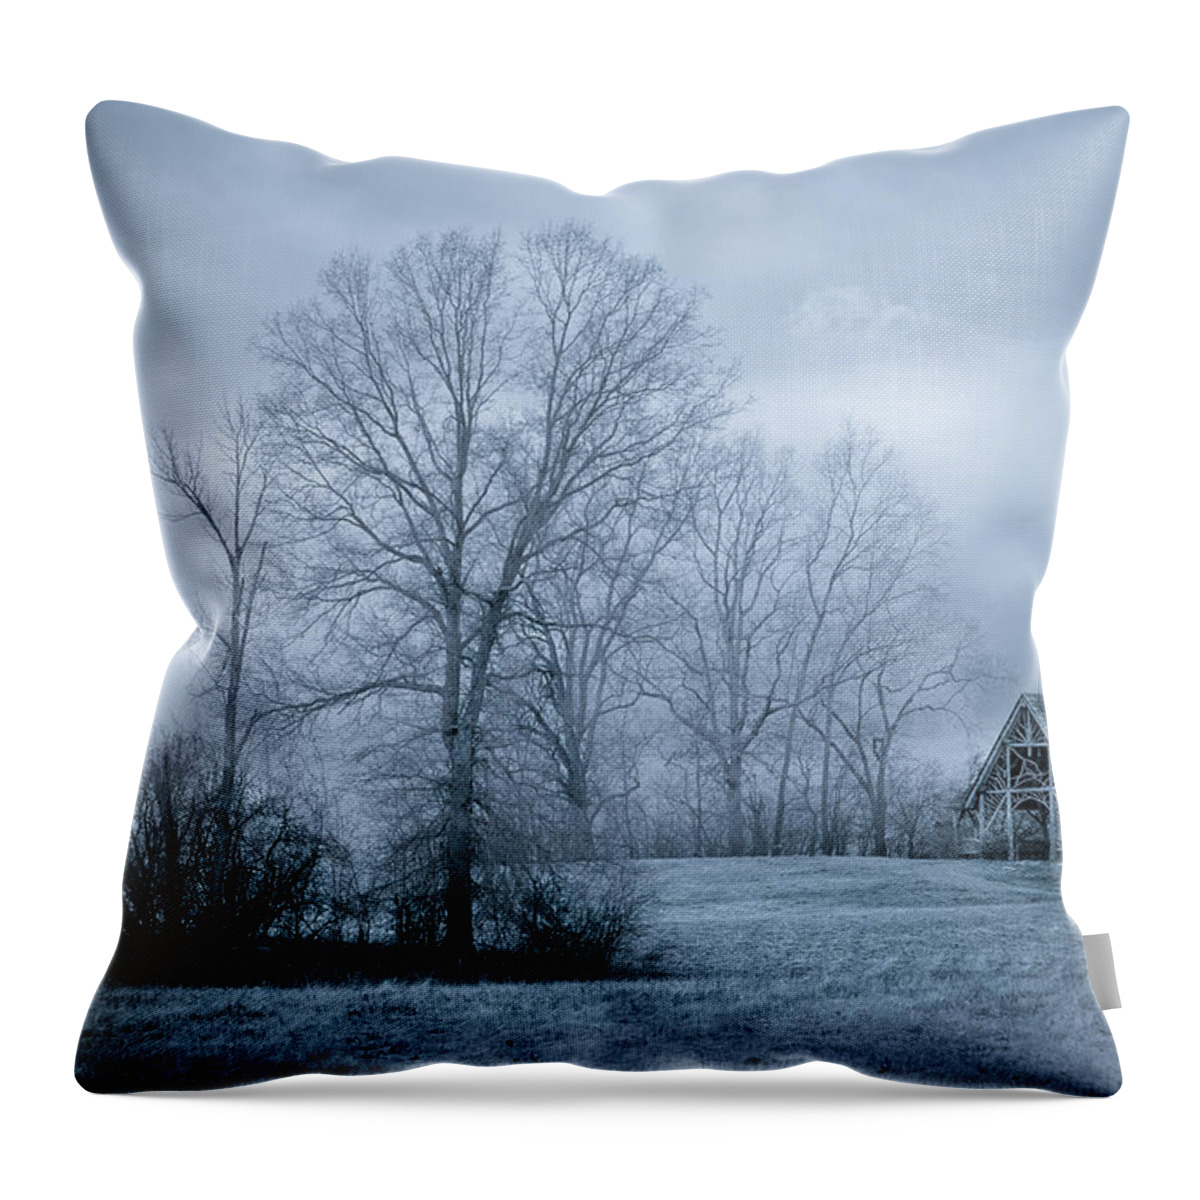 Cold Throw Pillow featuring the photograph November by Gary Heller